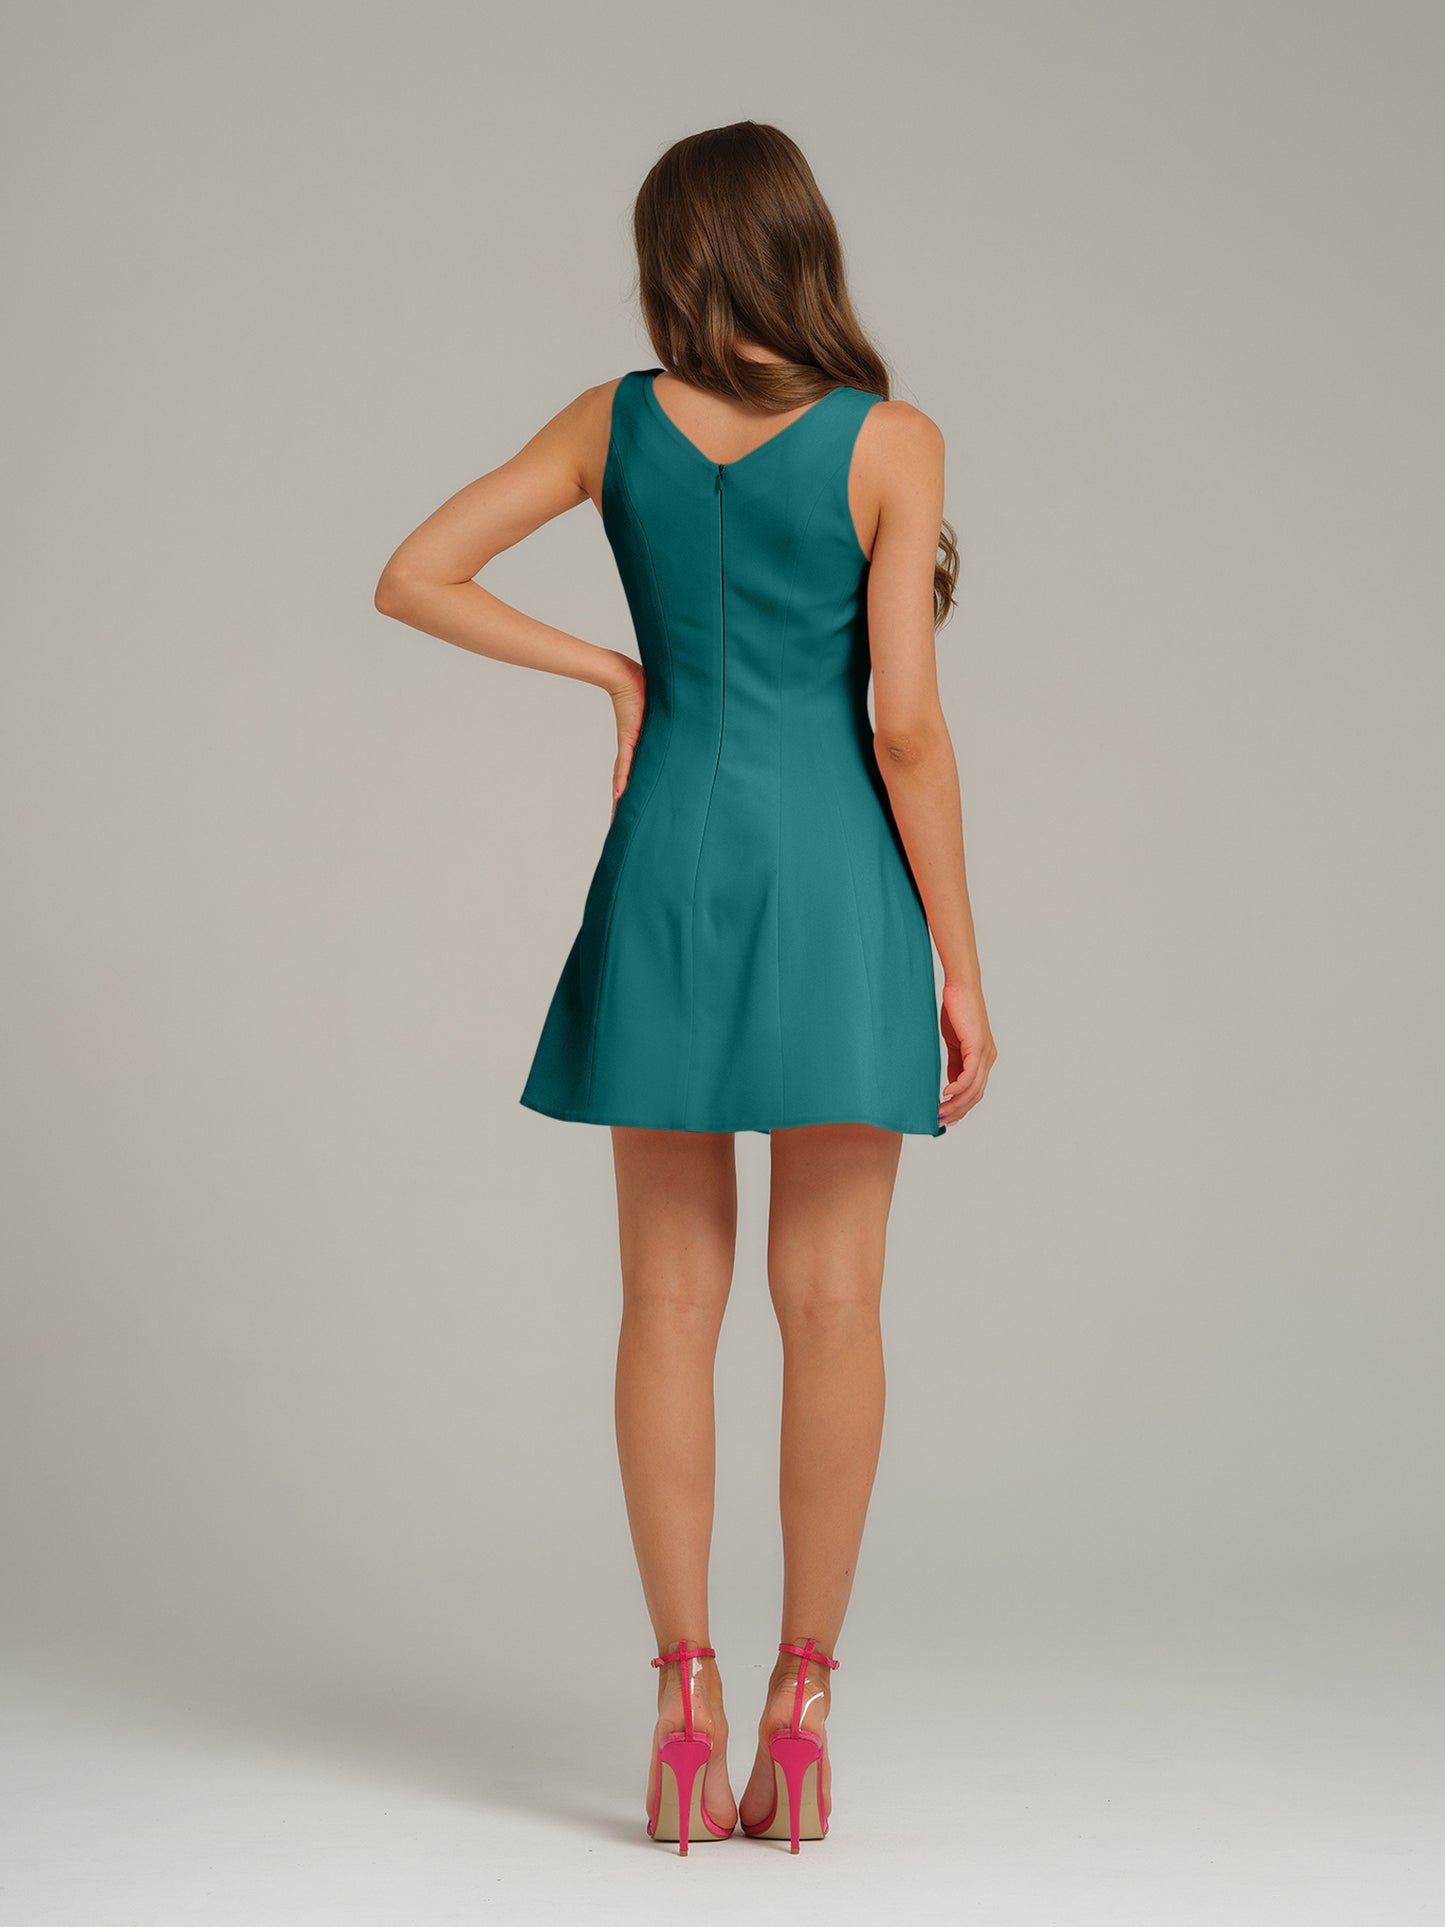 Tia DorraineLove Letter Flared Mini Dress - Magic BlueBring an air of effortless femininity to your edits with this romantic mini dress. Its sleeveless silhouette is cut from stretch crepe, detailed with a flattering sweetheart neckline, and a flared skir